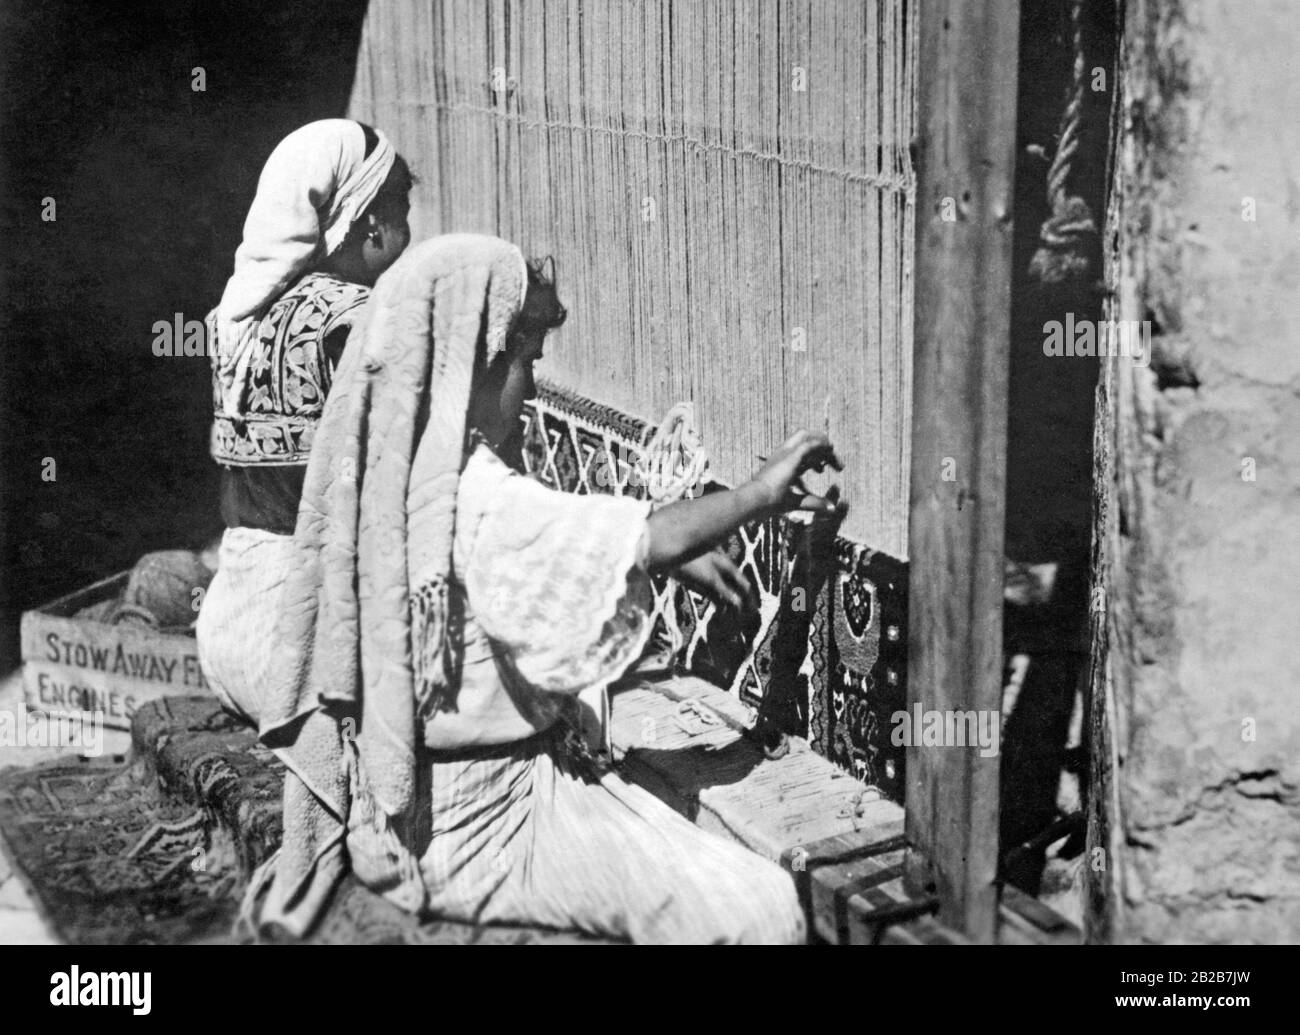 Tunisian women weaving carpets. The frame is fitted with bells so that one can hear when the women interrupt their work. Undated photo. Stock Photo